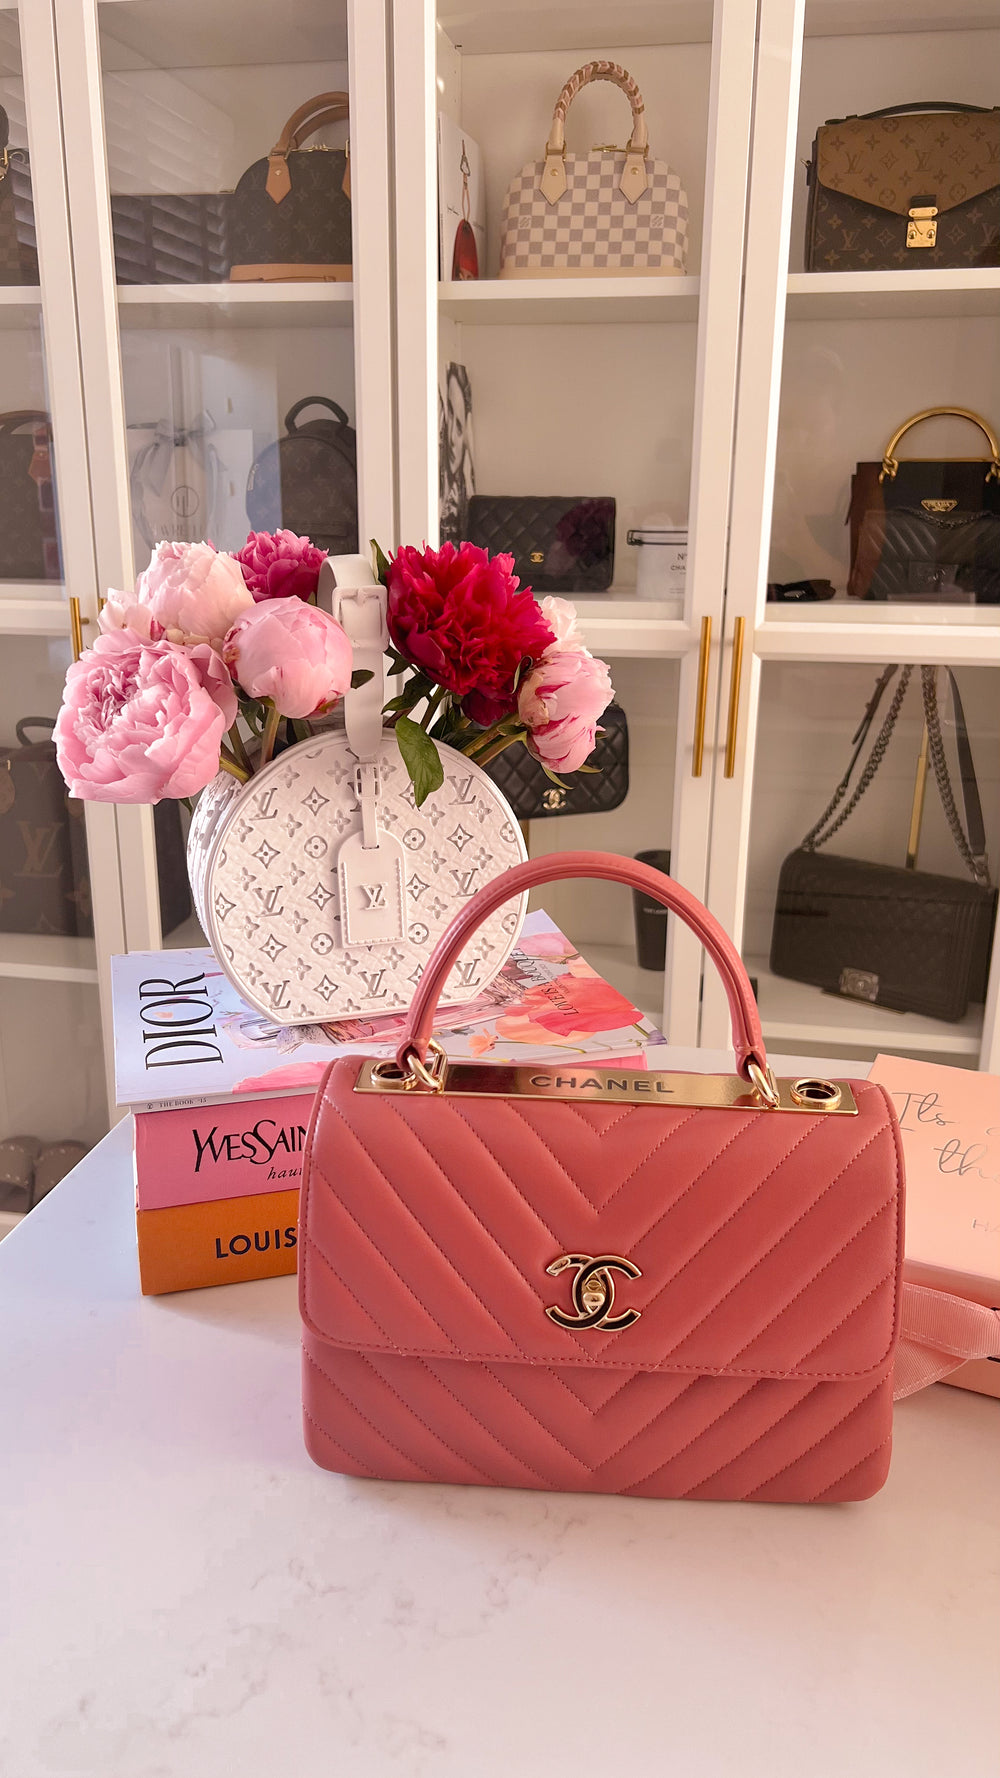 Style Theory: We Rented This Chanel Bag Last Week & Wondered: Is it Safe to  Rent Bags & Clothes During The Covid-19 Outbreak? - Infinite Blog by Style  Theory